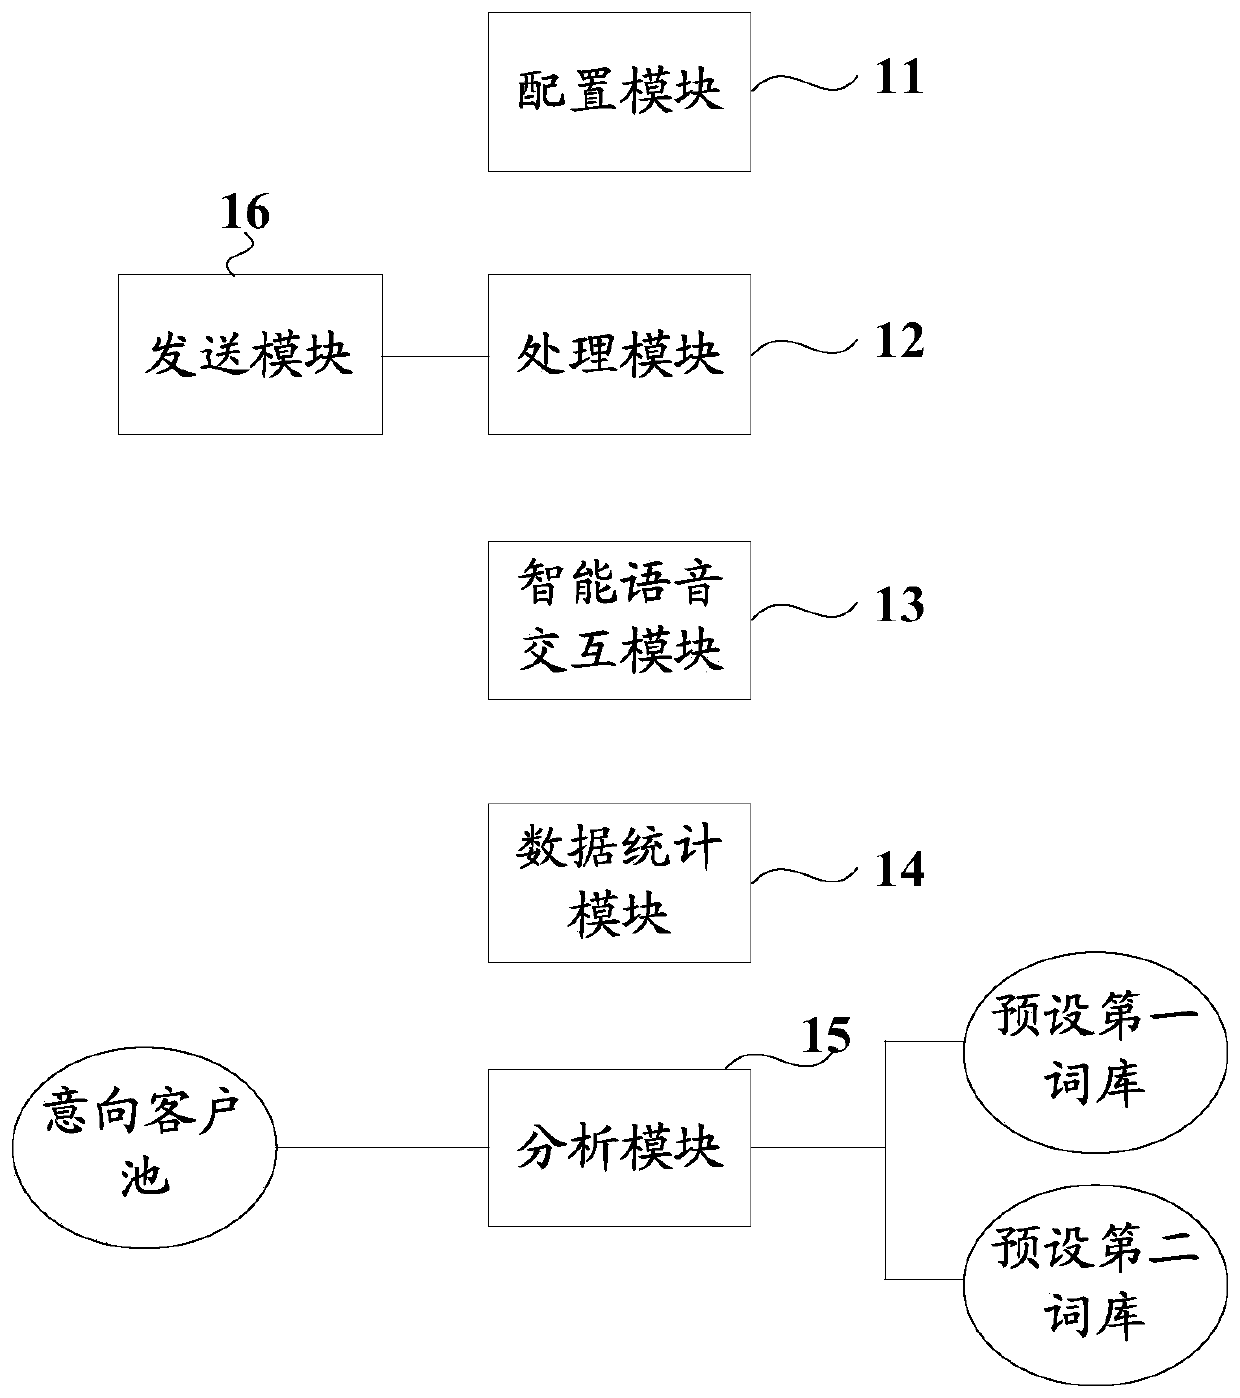 Artificial intelligence telephone customer developing marketing management system and method